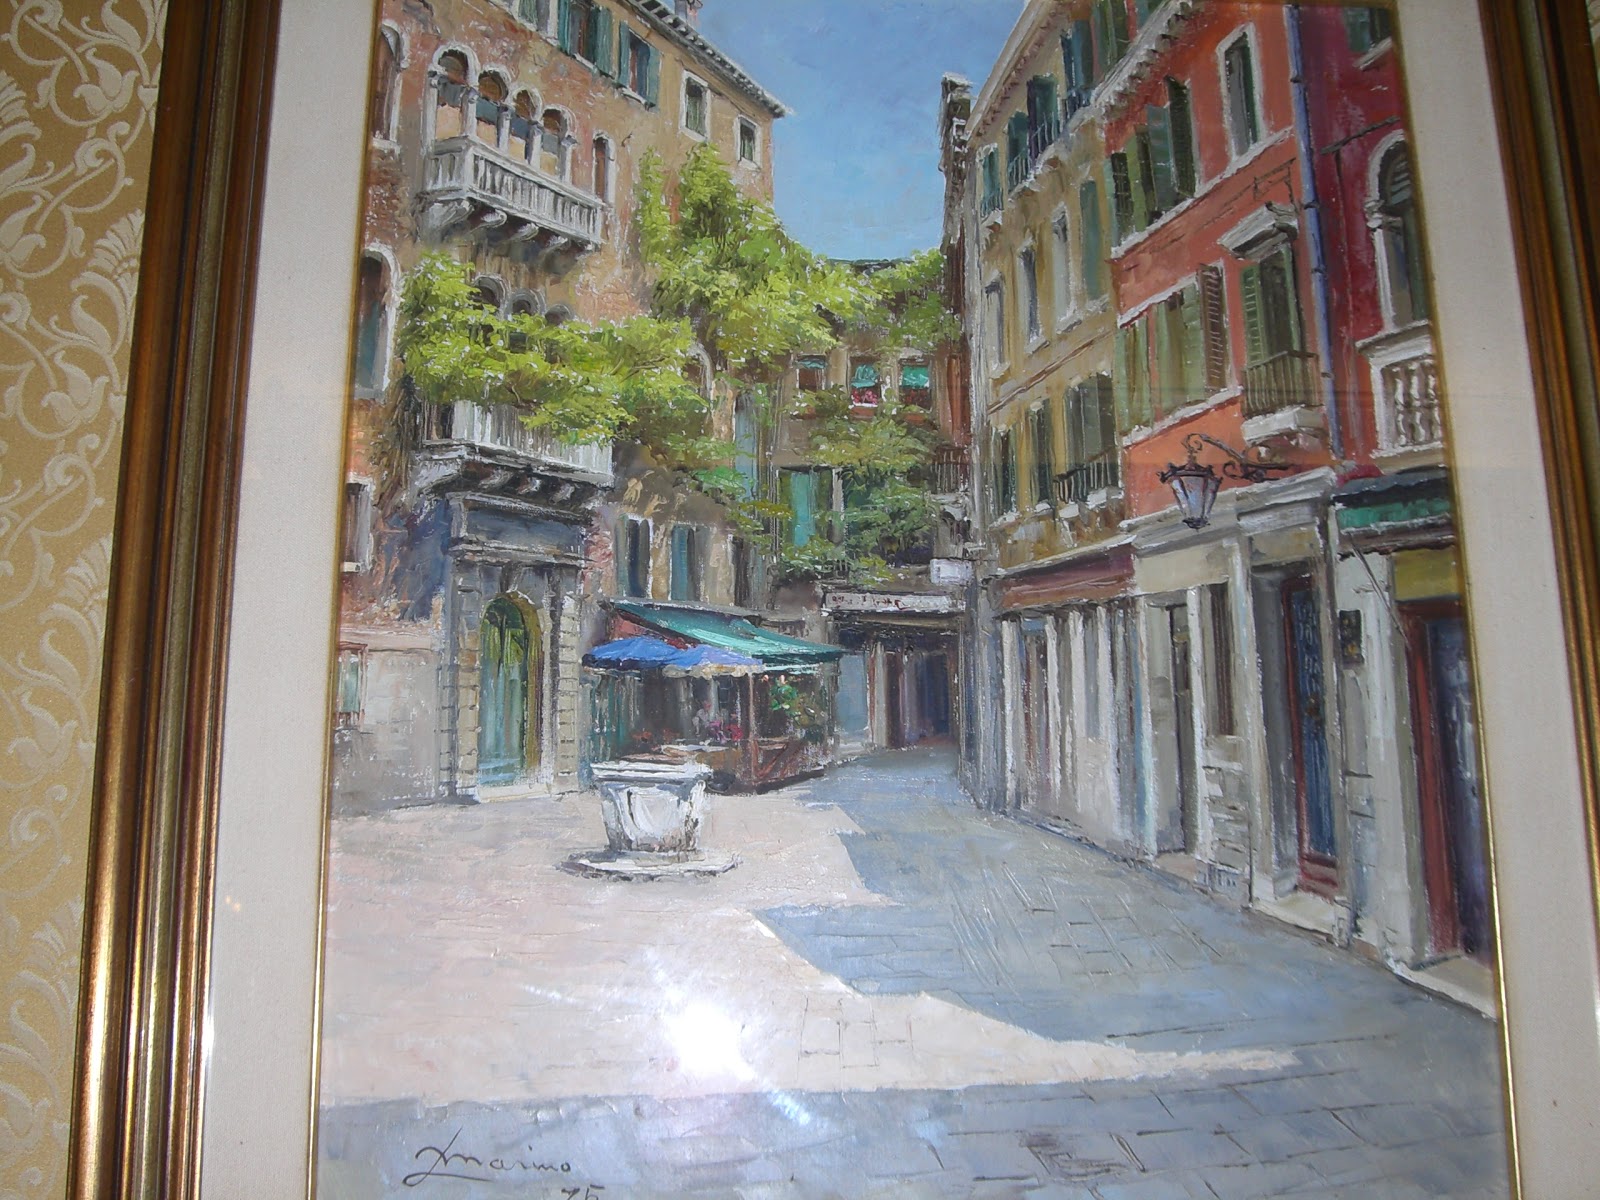 The Wisteria - A painting of Campo San Provolo